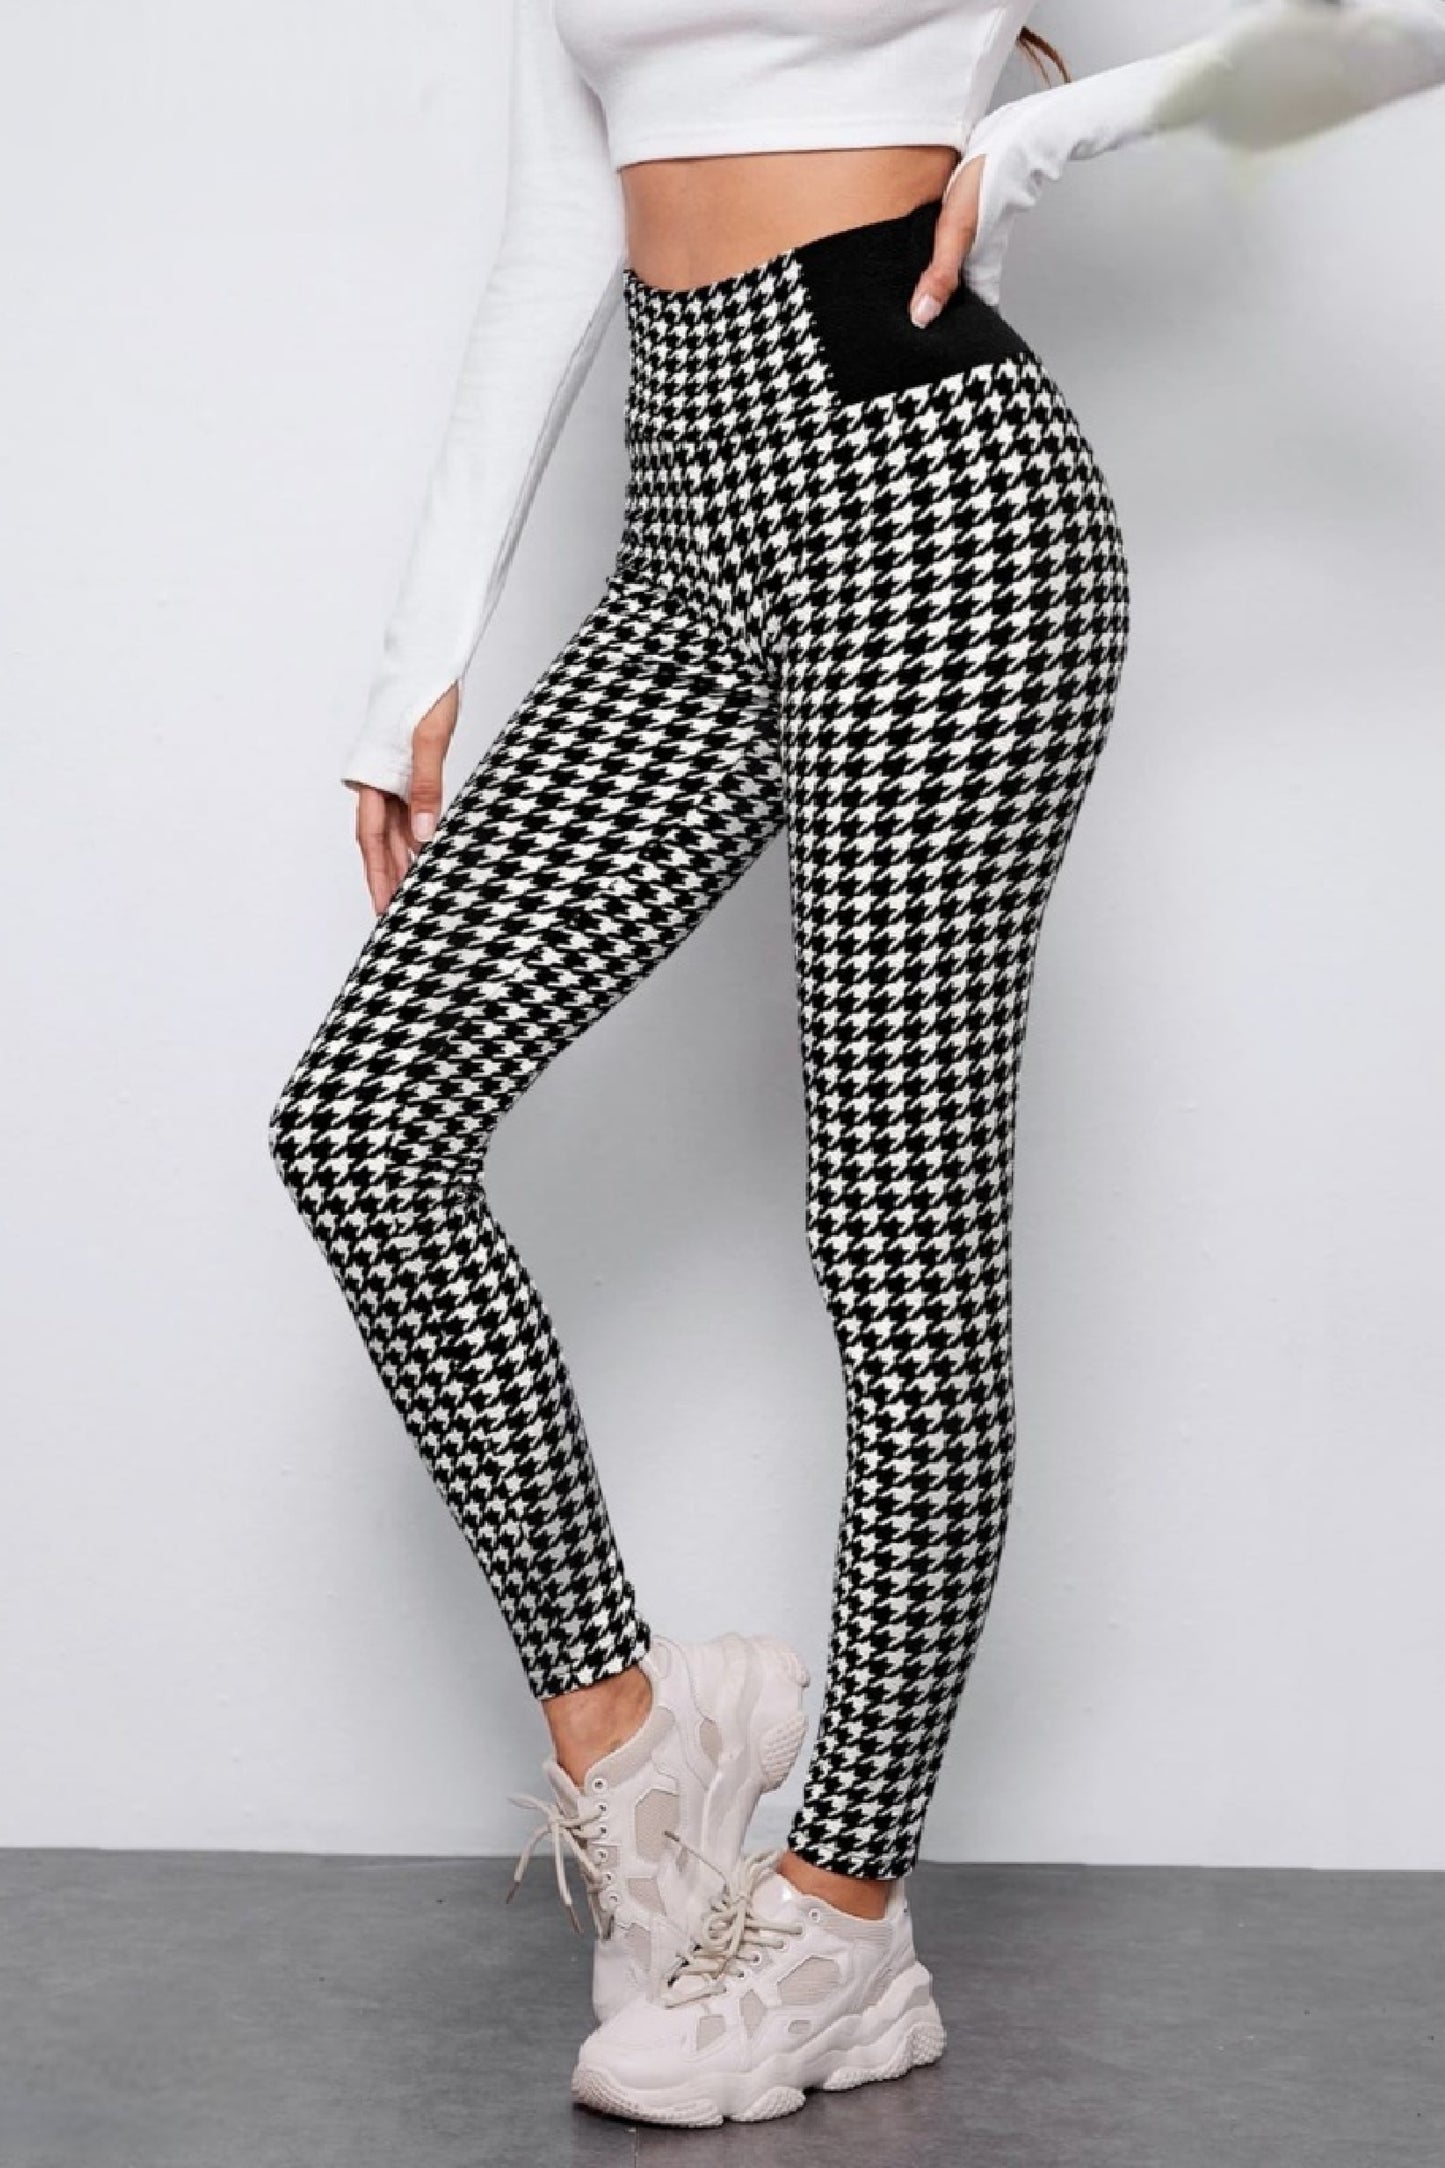 Black and white printed leggings for women available in the UAE